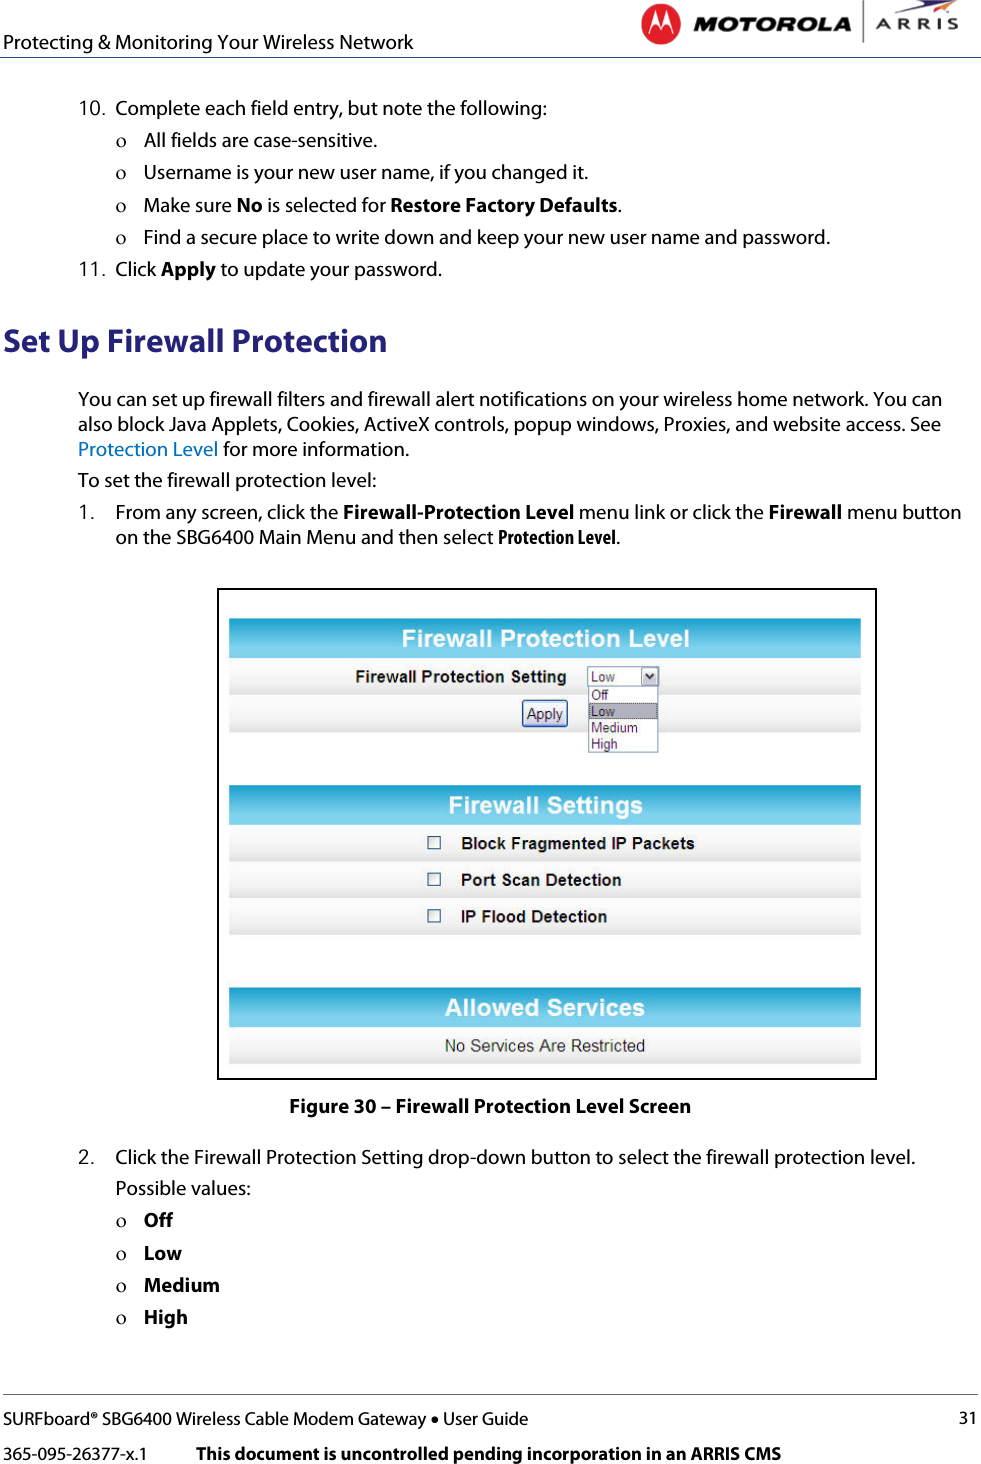 Protecting &amp; Monitoring Your Wireless Network   SURFboard® SBG6400 Wireless Cable Modem Gateway • User Guide 31 365-095-26377-x.1            This document is uncontrolled pending incorporation in an ARRIS CMS  10. Complete each field entry, but note the following: ο All fields are case-sensitive. ο Username is your new user name, if you changed it. ο Make sure No is selected for Restore Factory Defaults. ο Find a secure place to write down and keep your new user name and password. 11. Click Apply to update your password. Set Up Firewall Protection You can set up firewall filters and firewall alert notifications on your wireless home network. You can also block Java Applets, Cookies, ActiveX controls, popup windows, Proxies, and website access. See Protection Level for more information. To set the firewall protection level: 1. From any screen, click the Firewall-Protection Level menu link or click the Firewall menu button on the SBG6400 Main Menu and then select Protection Level.  Figure 30 – Firewall Protection Level Screen 2. Click the Firewall Protection Setting drop-down button to select the firewall protection level.  Possible values: ο Off ο Low ο Medium ο High 